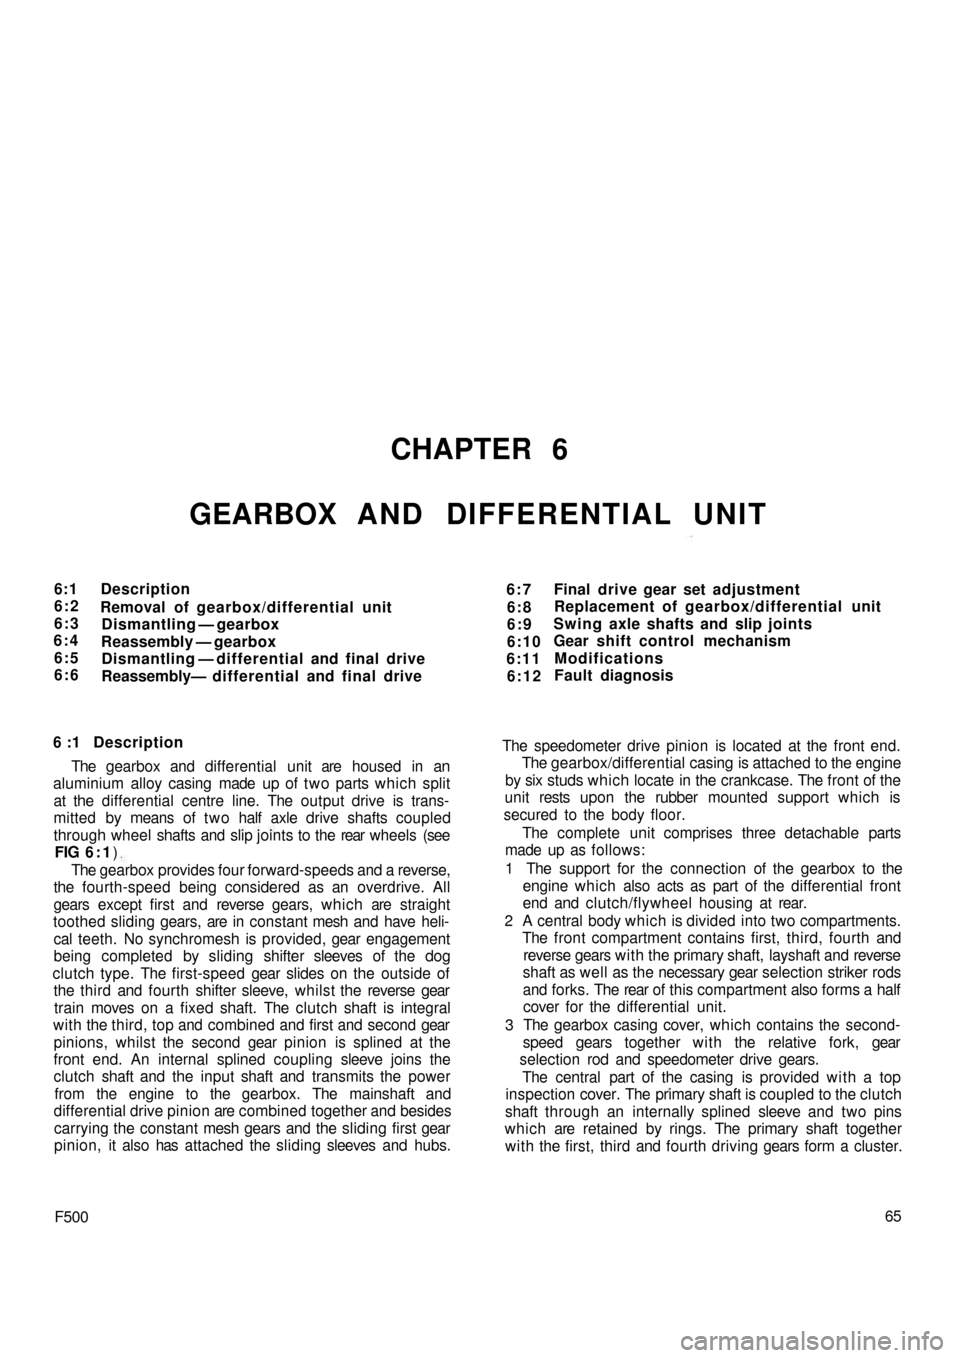 FIAT 500 1971 1.G Workshop Manual CHAPTER 6
GEARBOX AND DIFFERENTIAL UNIT
6:1
6:2
6:3
6:4
6:5
6:6Description
Removal of gearbox/differential unit
Dismantling — gearbox
Reassembly — gearbox
Dismantling — differential and final dr